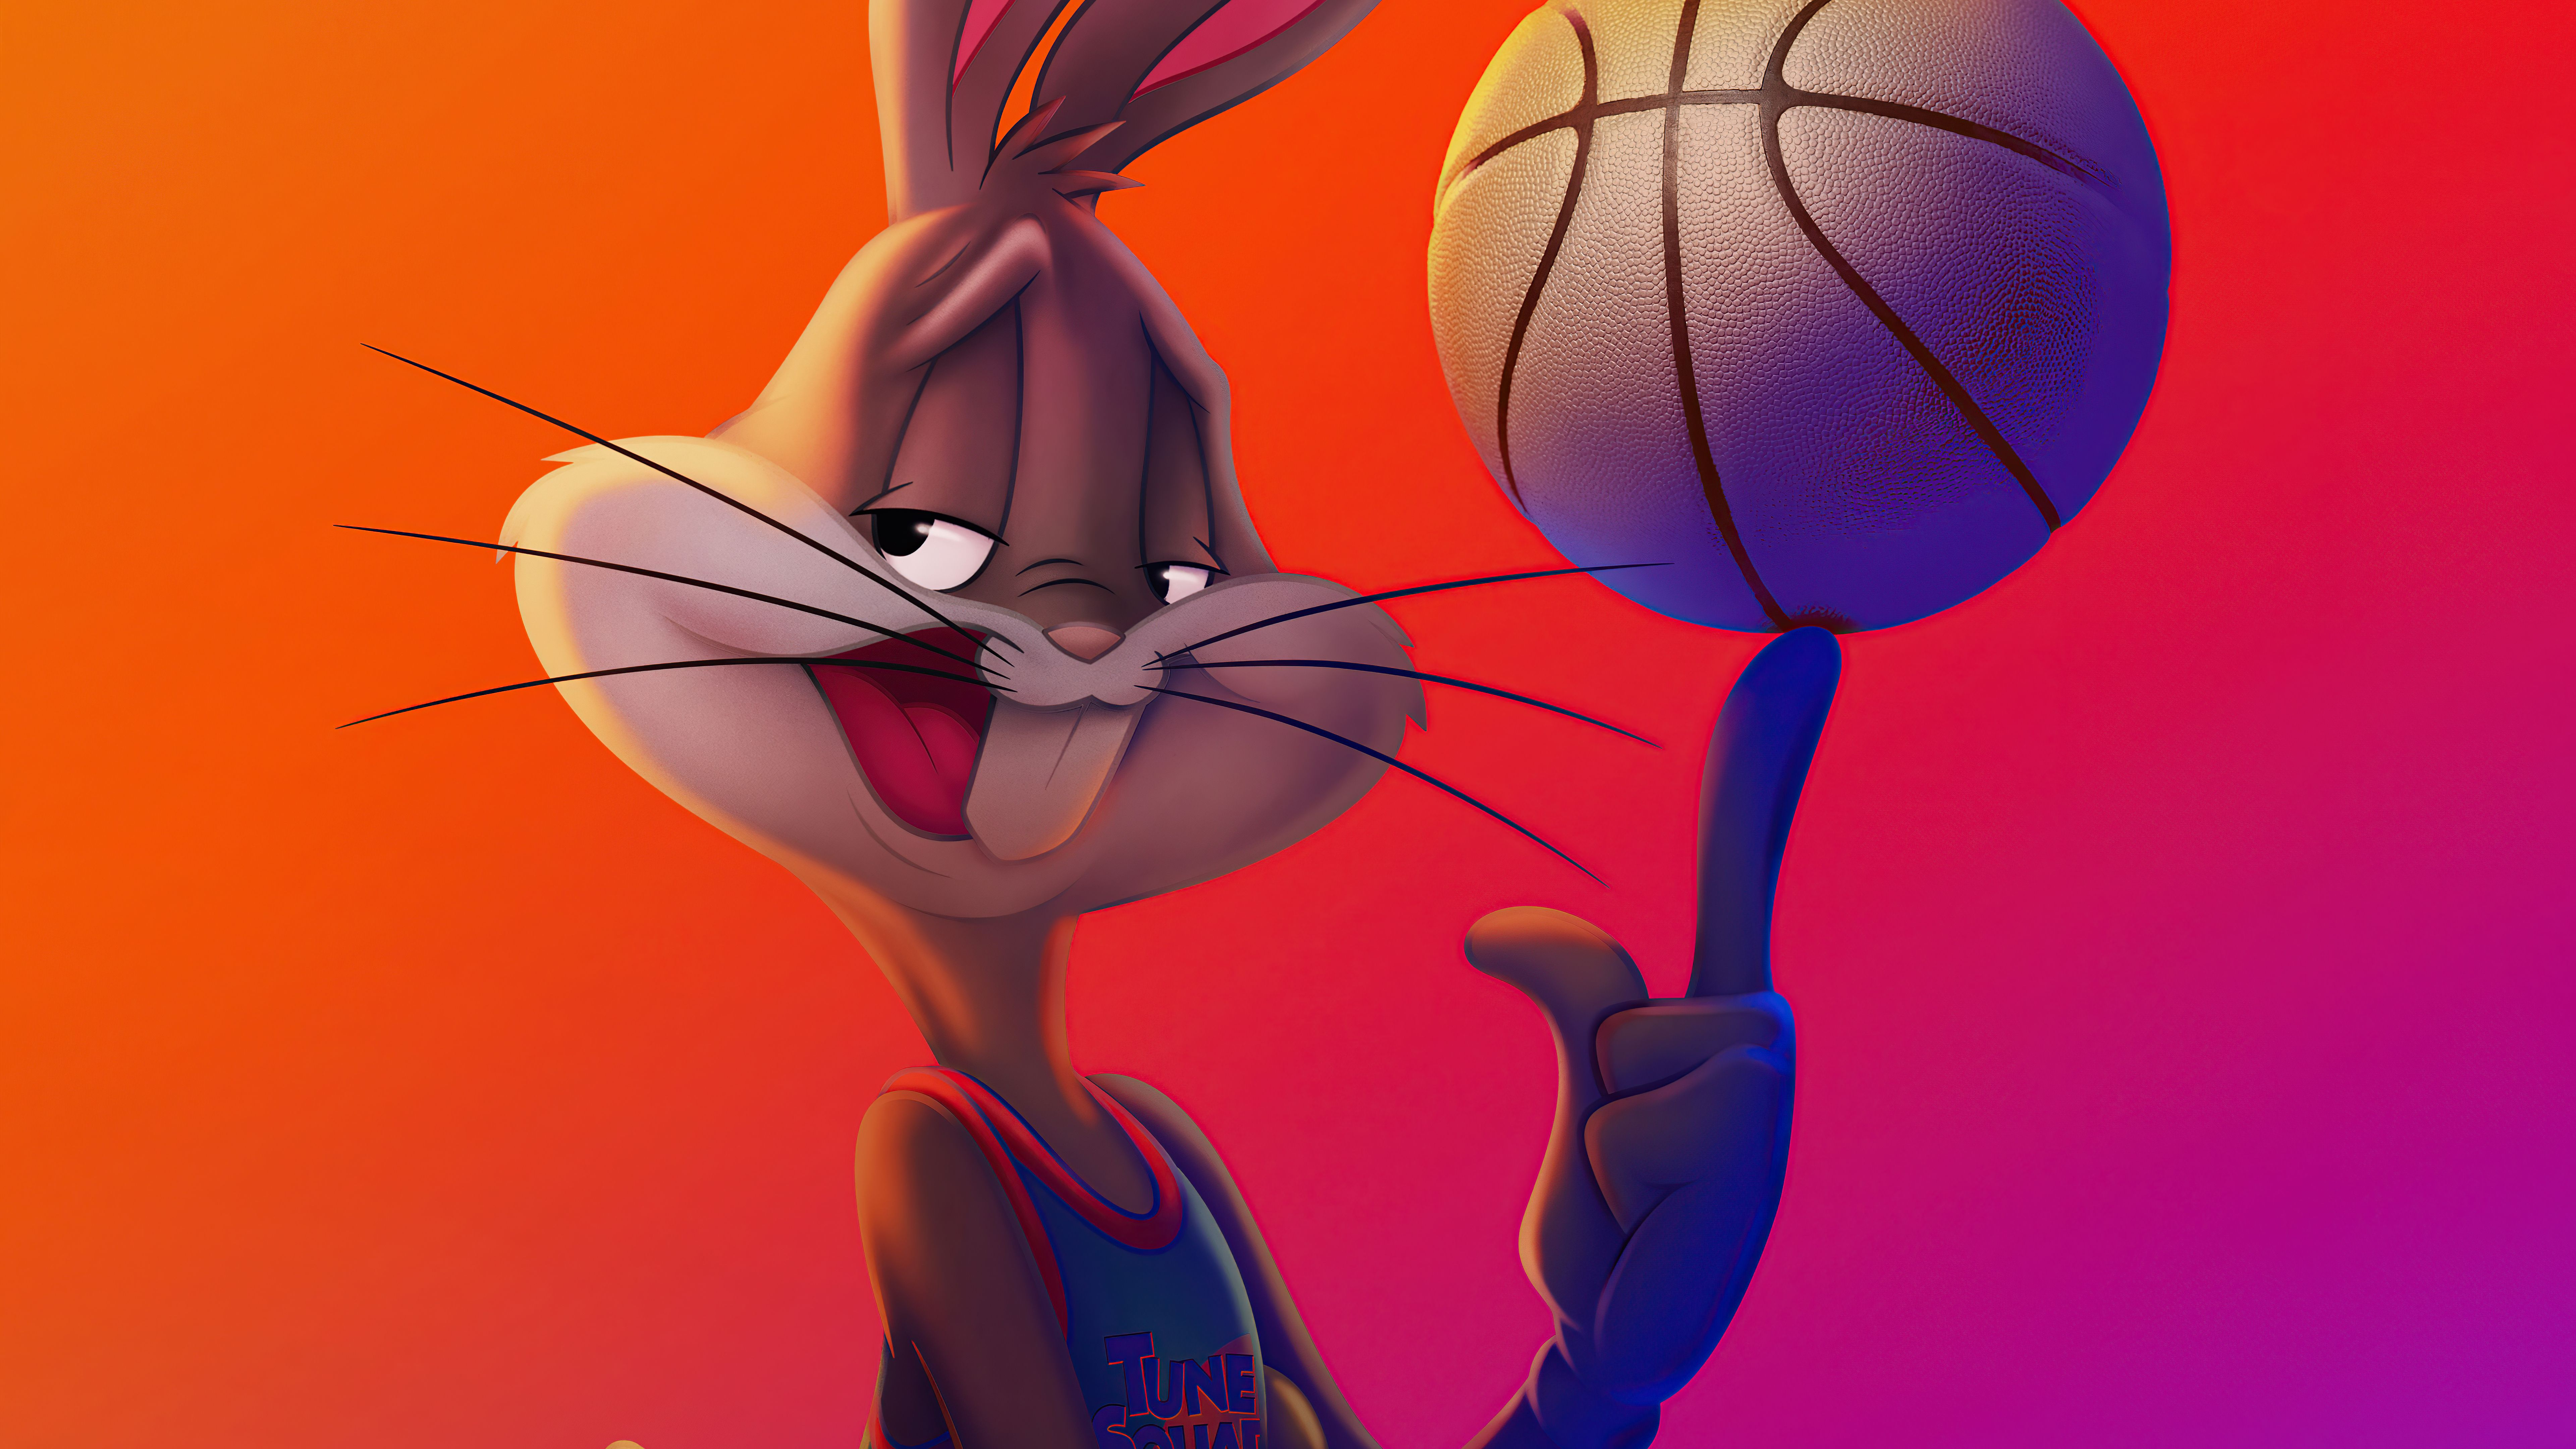 Wallpaper 4k Bugs Bunny Space Jam A New Legacy 4k Bugs Bunny Space Jam A New Legacy 4k wallpaper